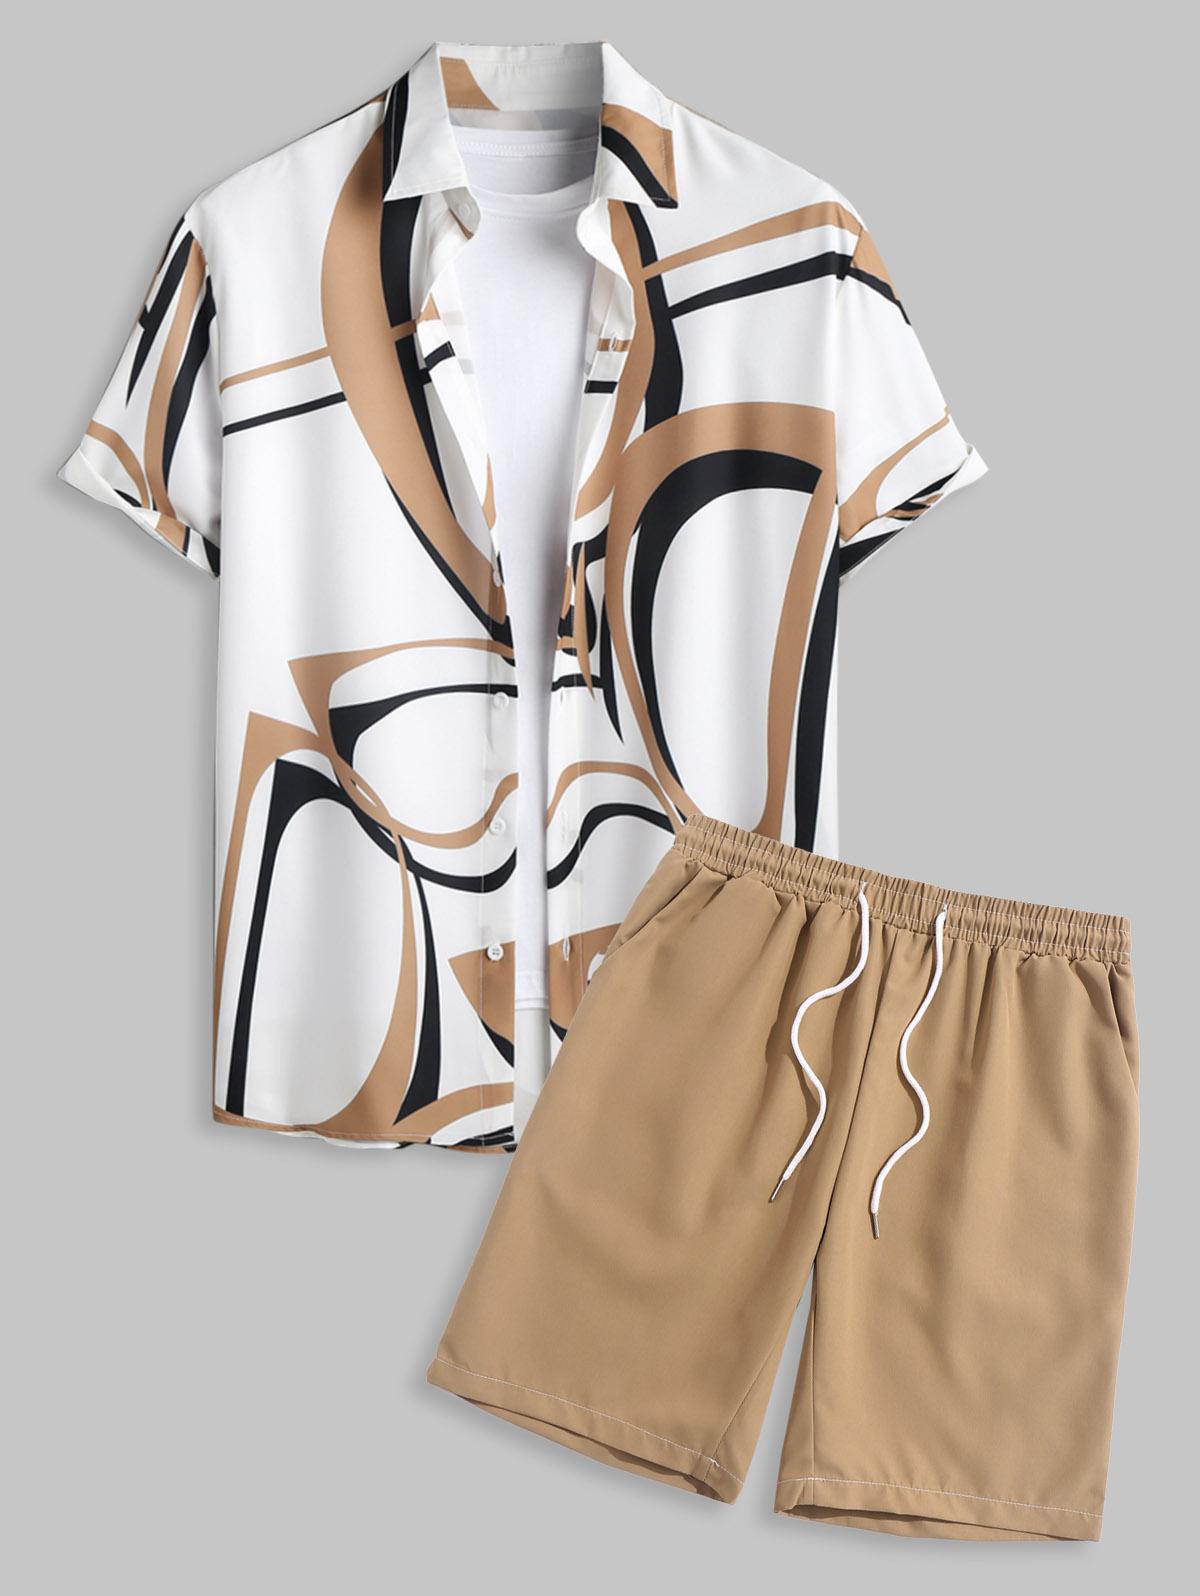 ZAFUL Men's Men's Casual Abstract Geo Print Button Up Short Sleeves Shirt and Basic Casual Shorts Set Light coffee